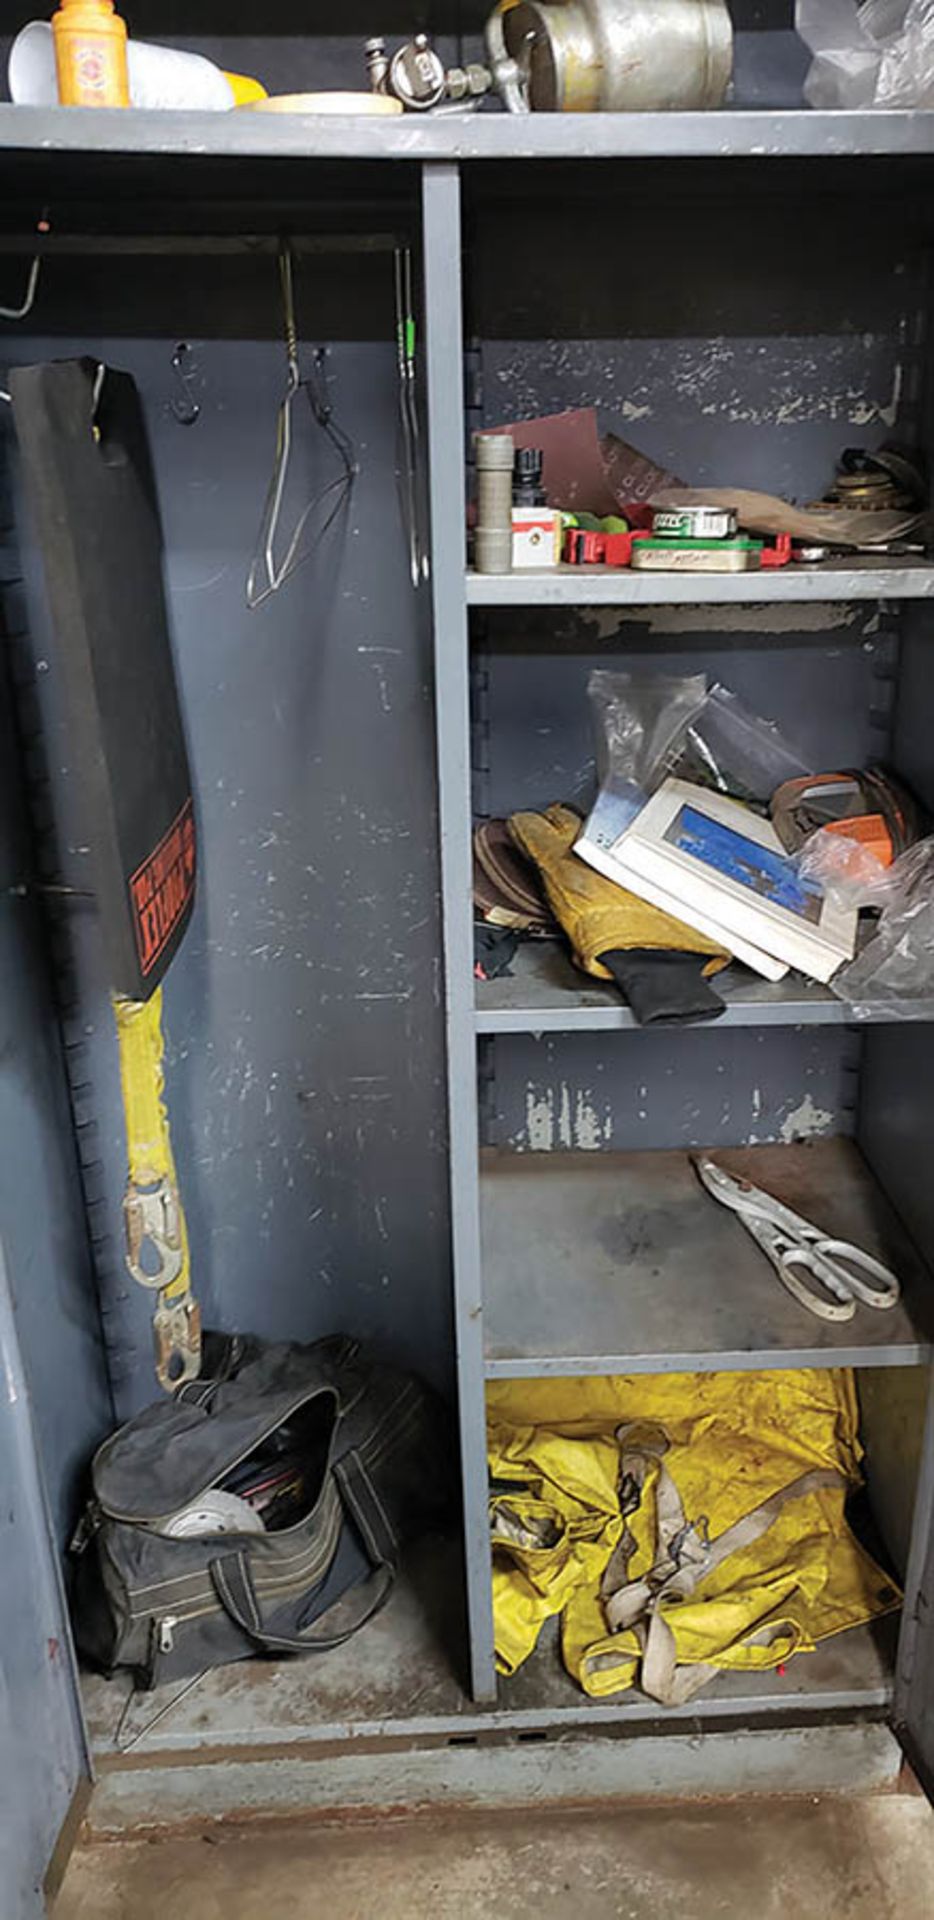 (2) 3-LOCKER UNITS, METAL CABINET W/ CONTENTS - Image 3 of 4